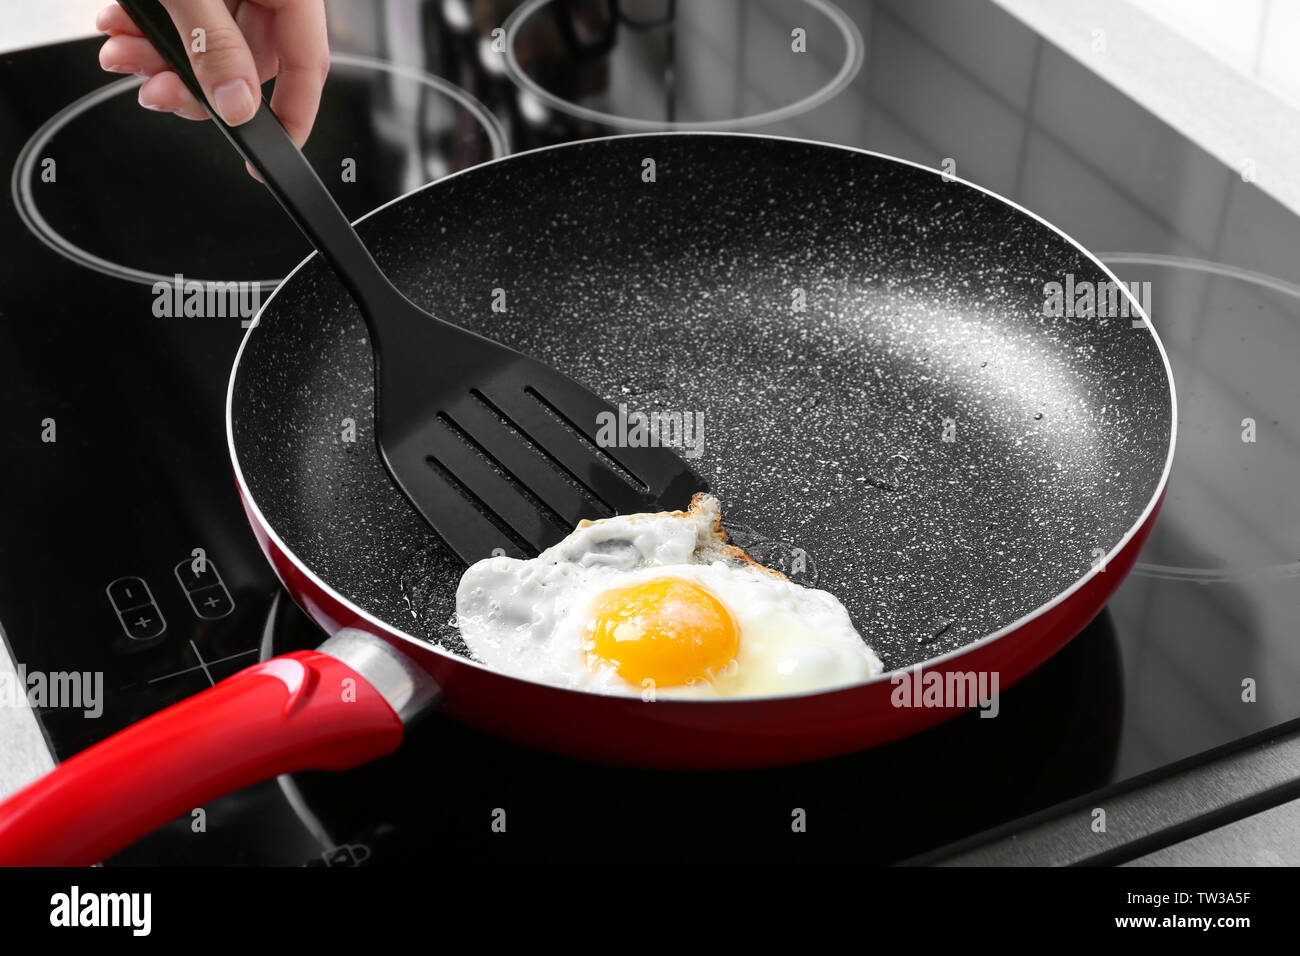 Hand of woman cooking over hard fried egg using spatula Stock Photo - Alamy